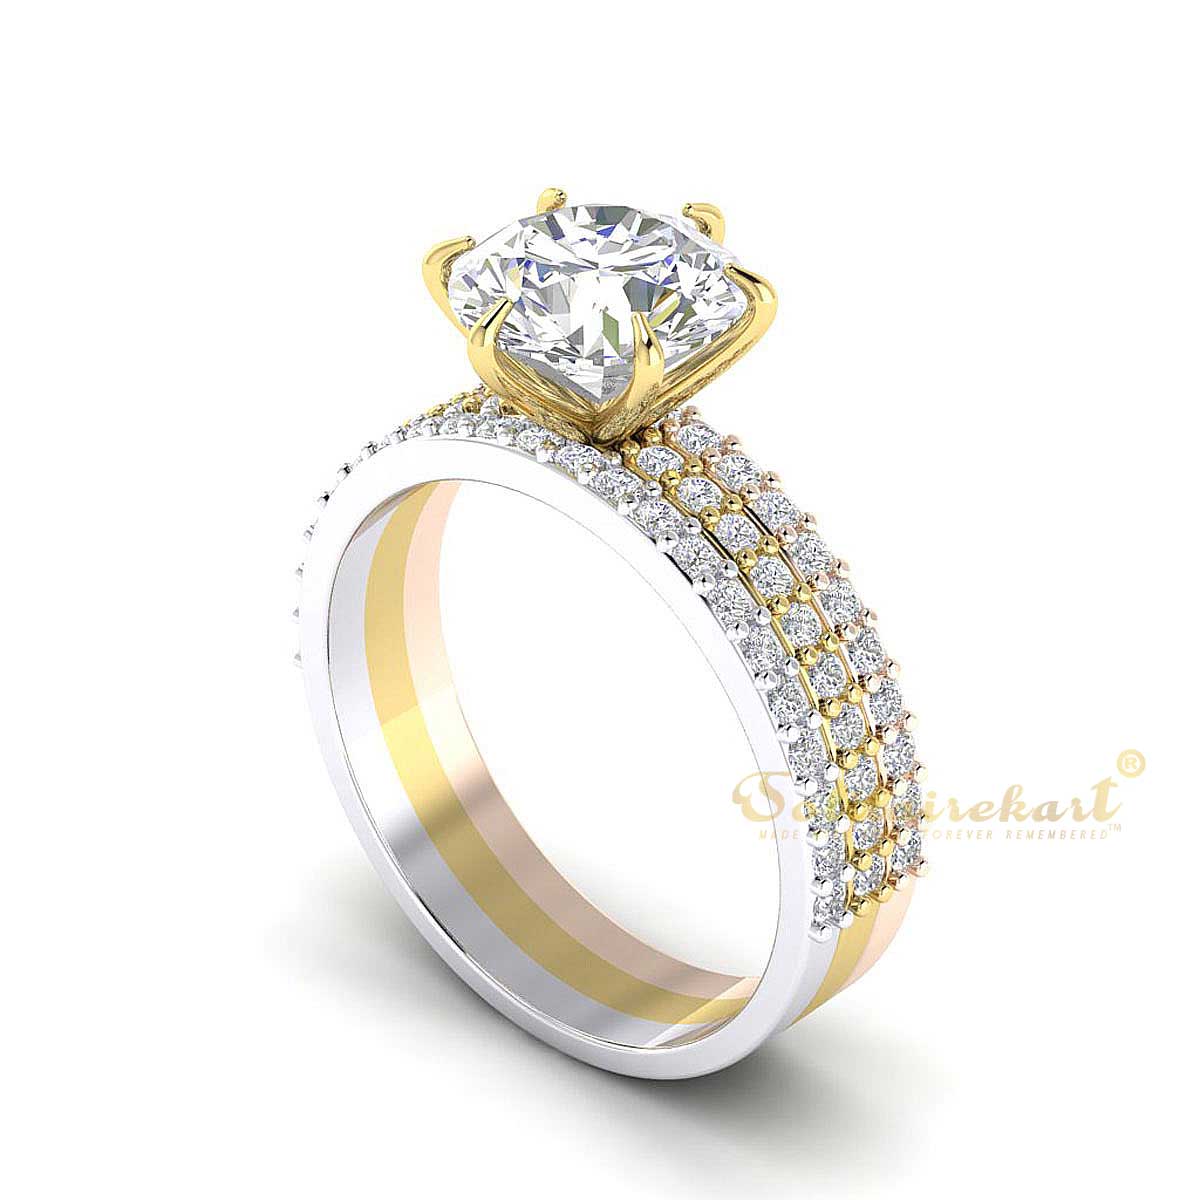 Buy 22Kt Gold Coorg Pavithra Ring 569VA98 Online from Vaibhav Jewellers